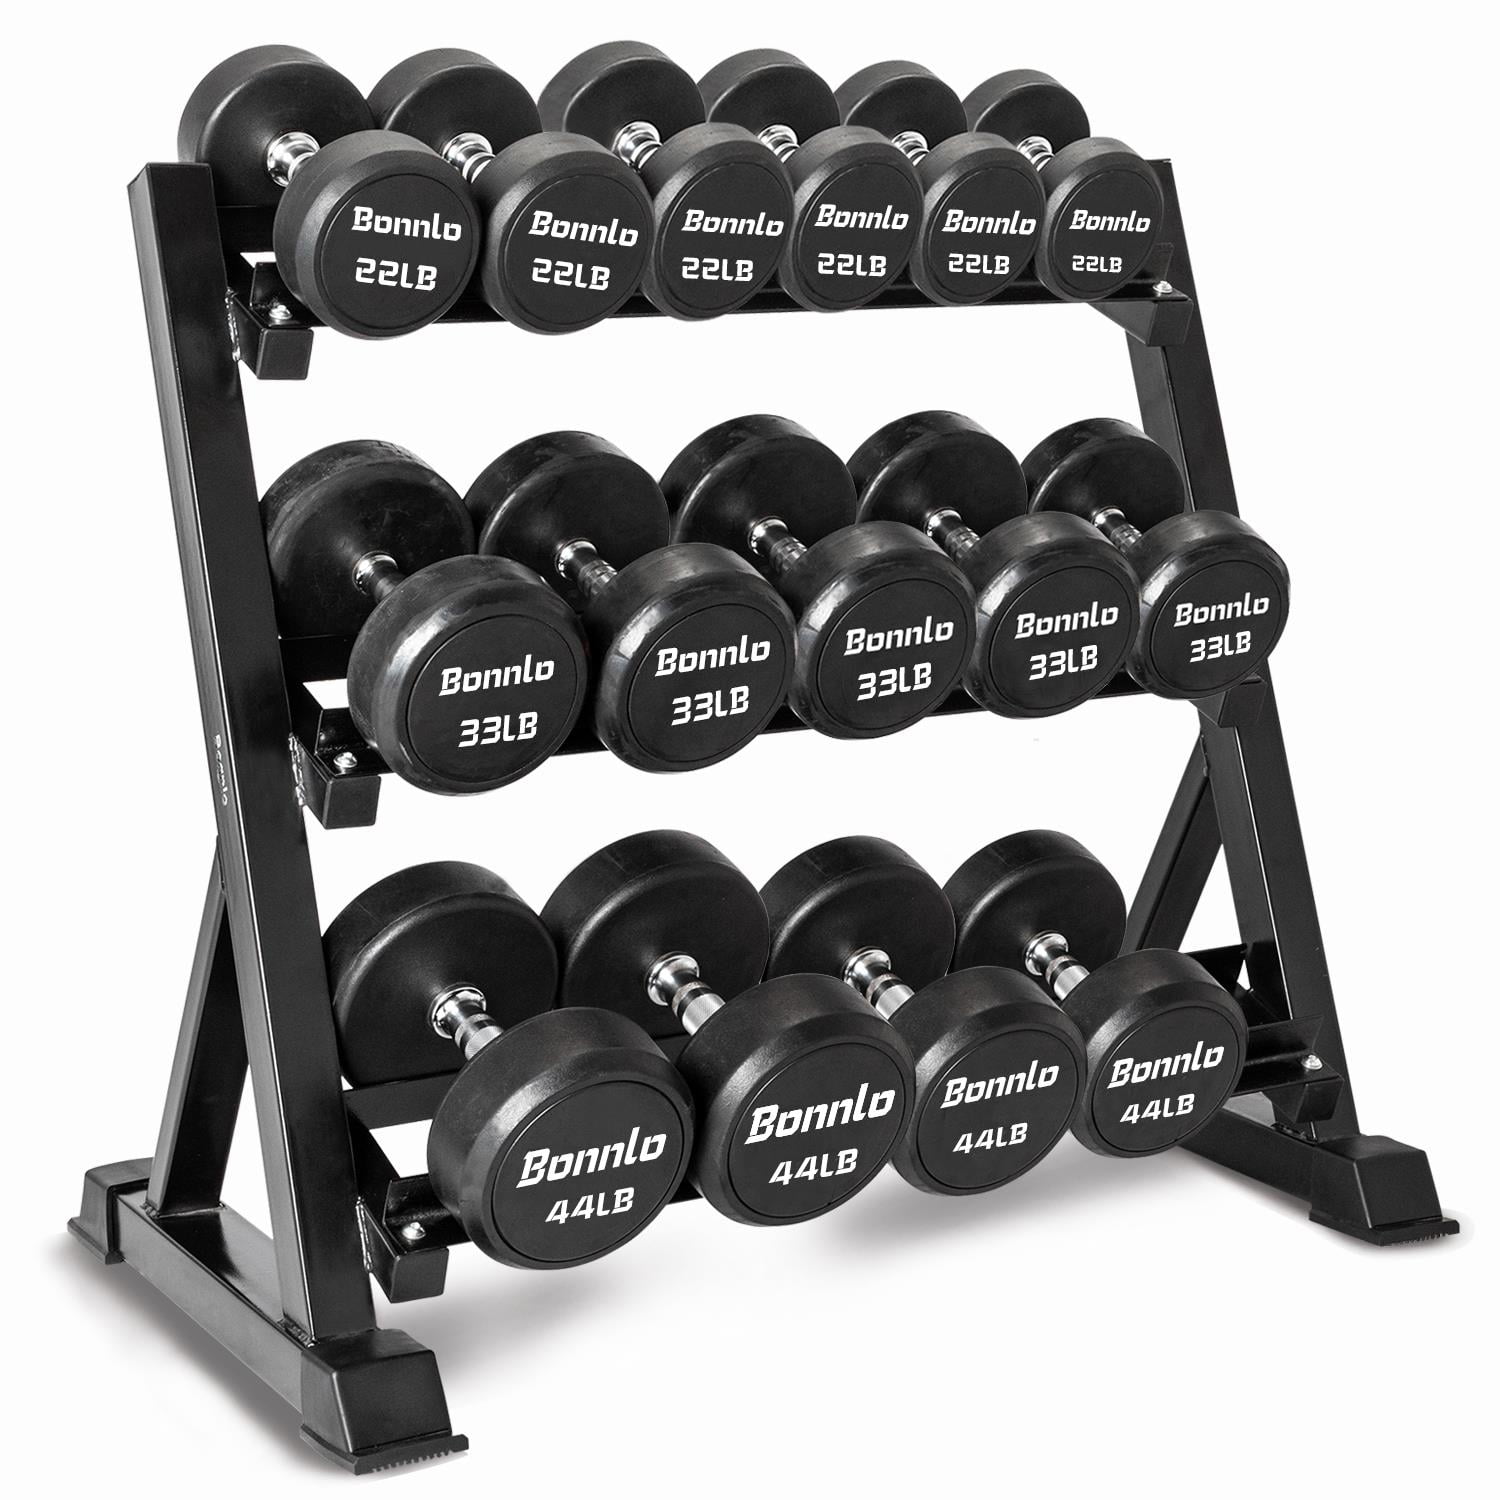 3 Tier Dumbbell Stand Storage Rack Weight Tree Holder Tower Home Gym fitness UK